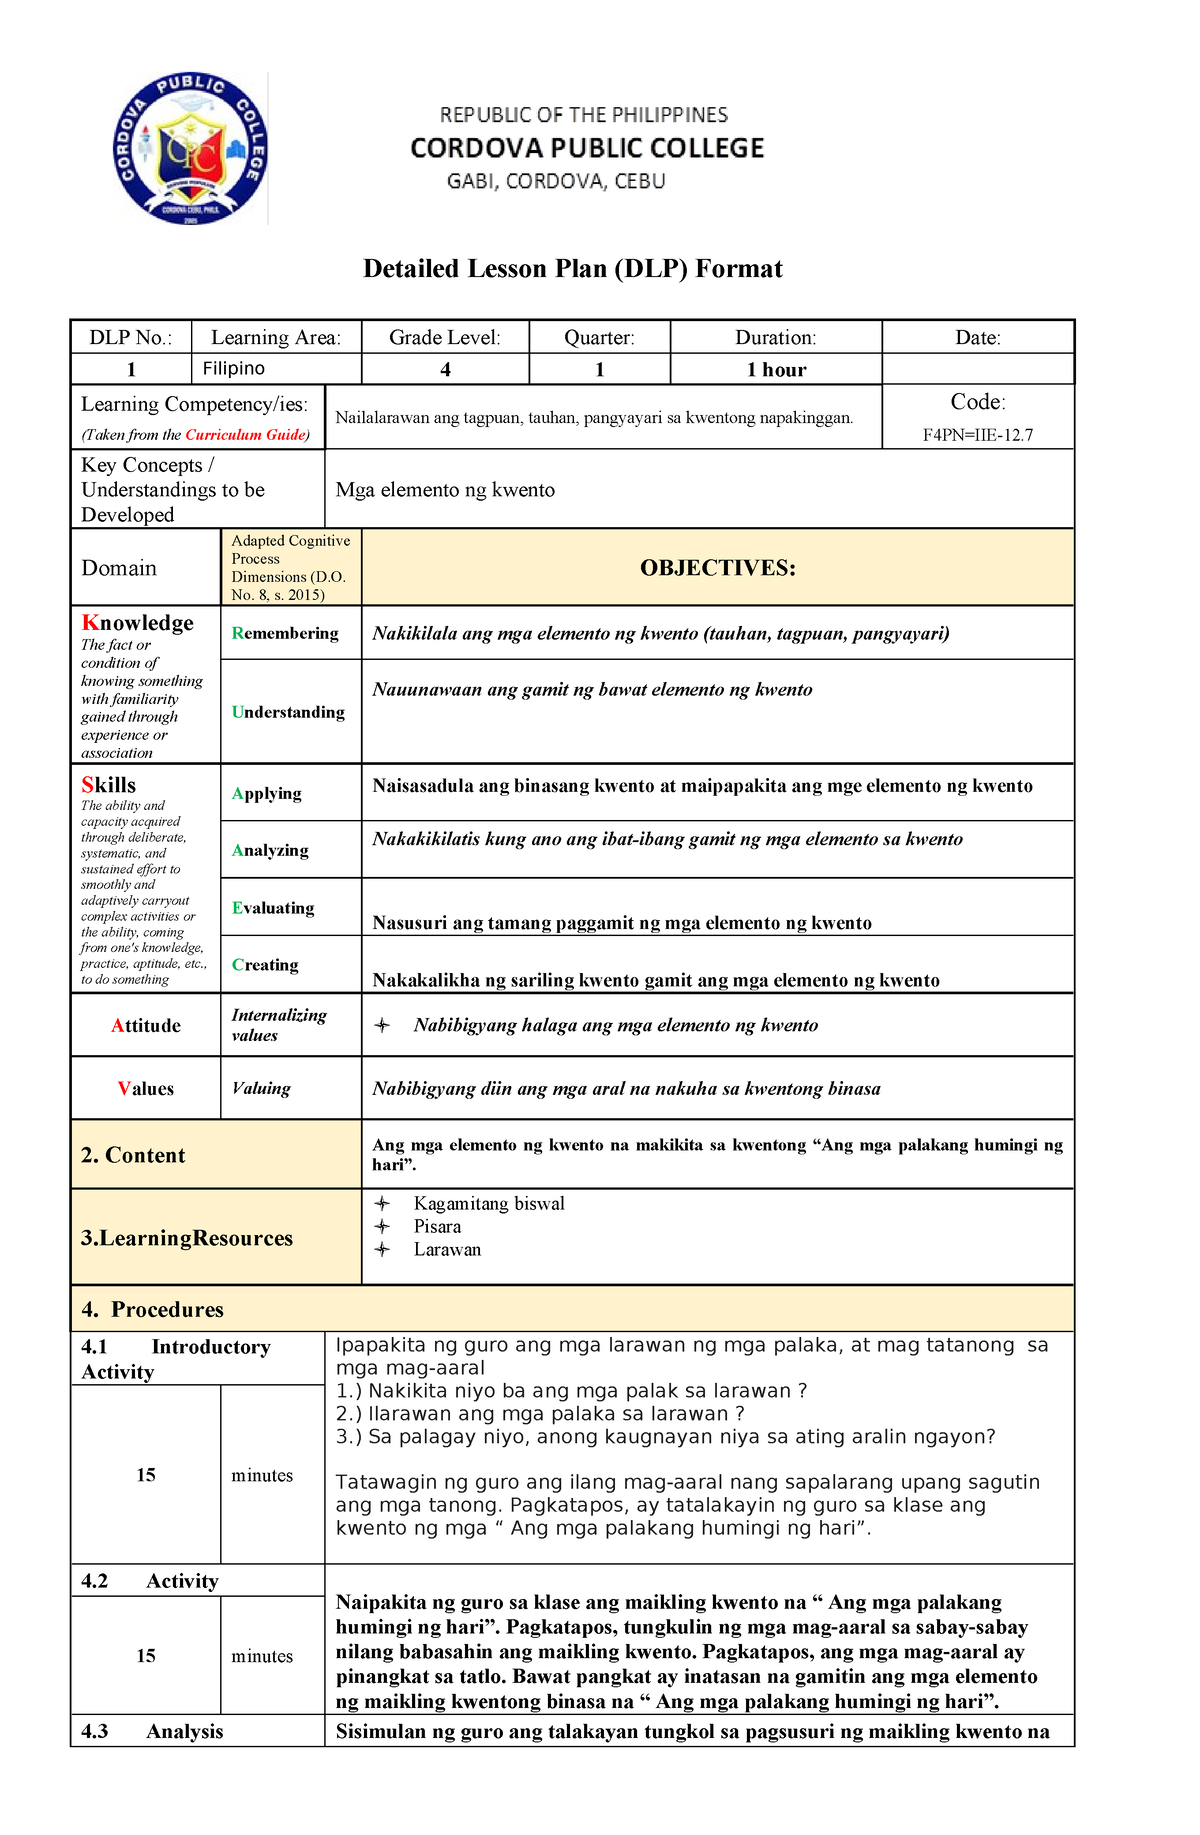 Detailed Lesson Plan Template 1 5 Detailed Lesson Plan Dlp Format Dlp No Learning Area 7606